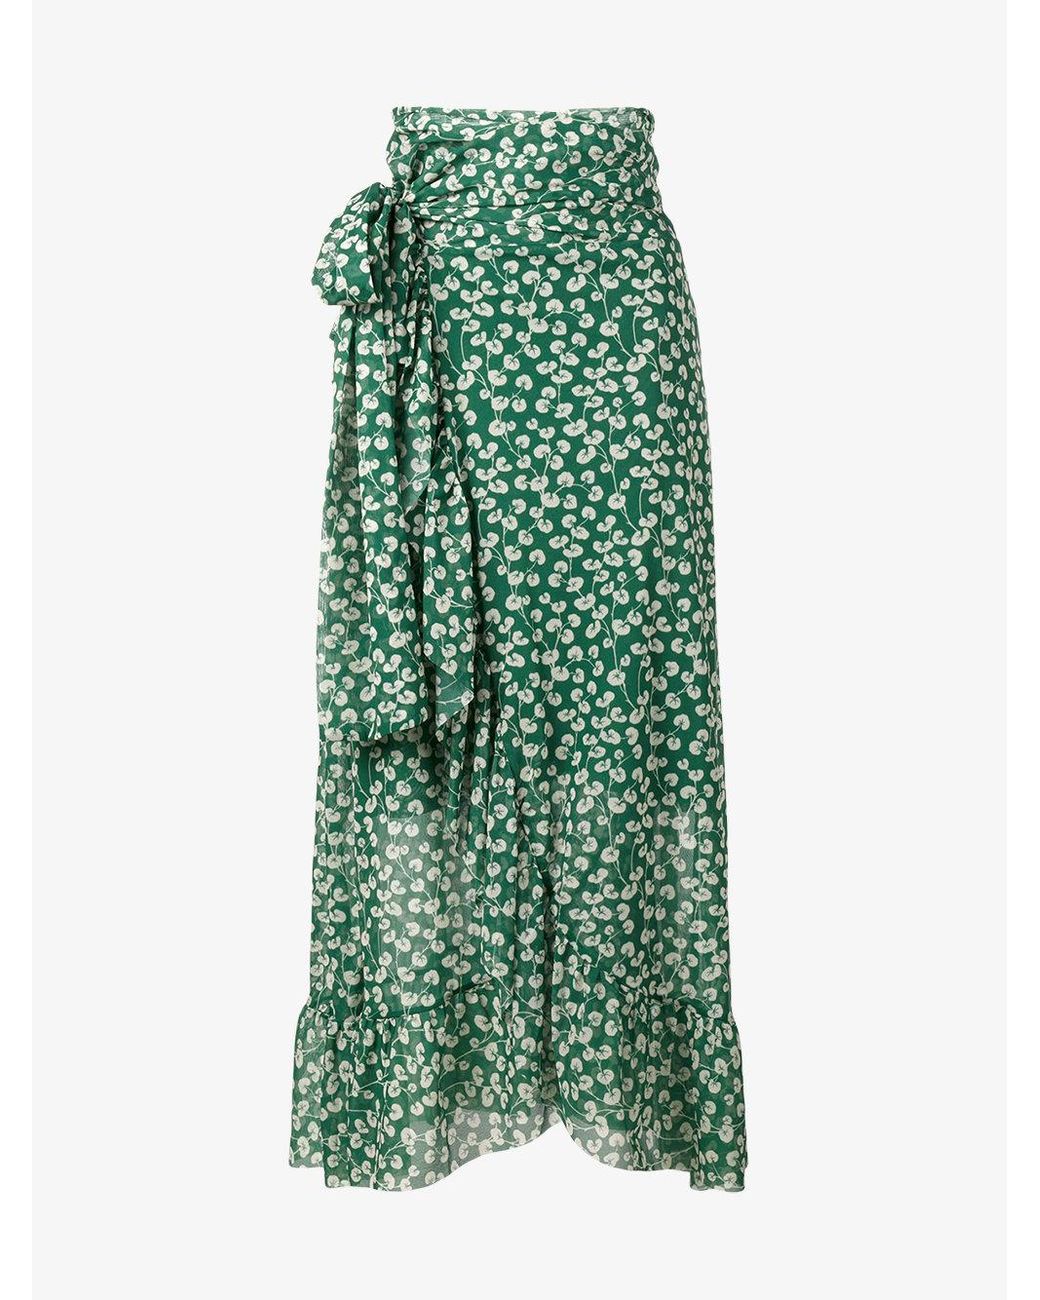 Ganni Synthetic Capella Mesh Floral Print Skirt in Green | Lyst UK